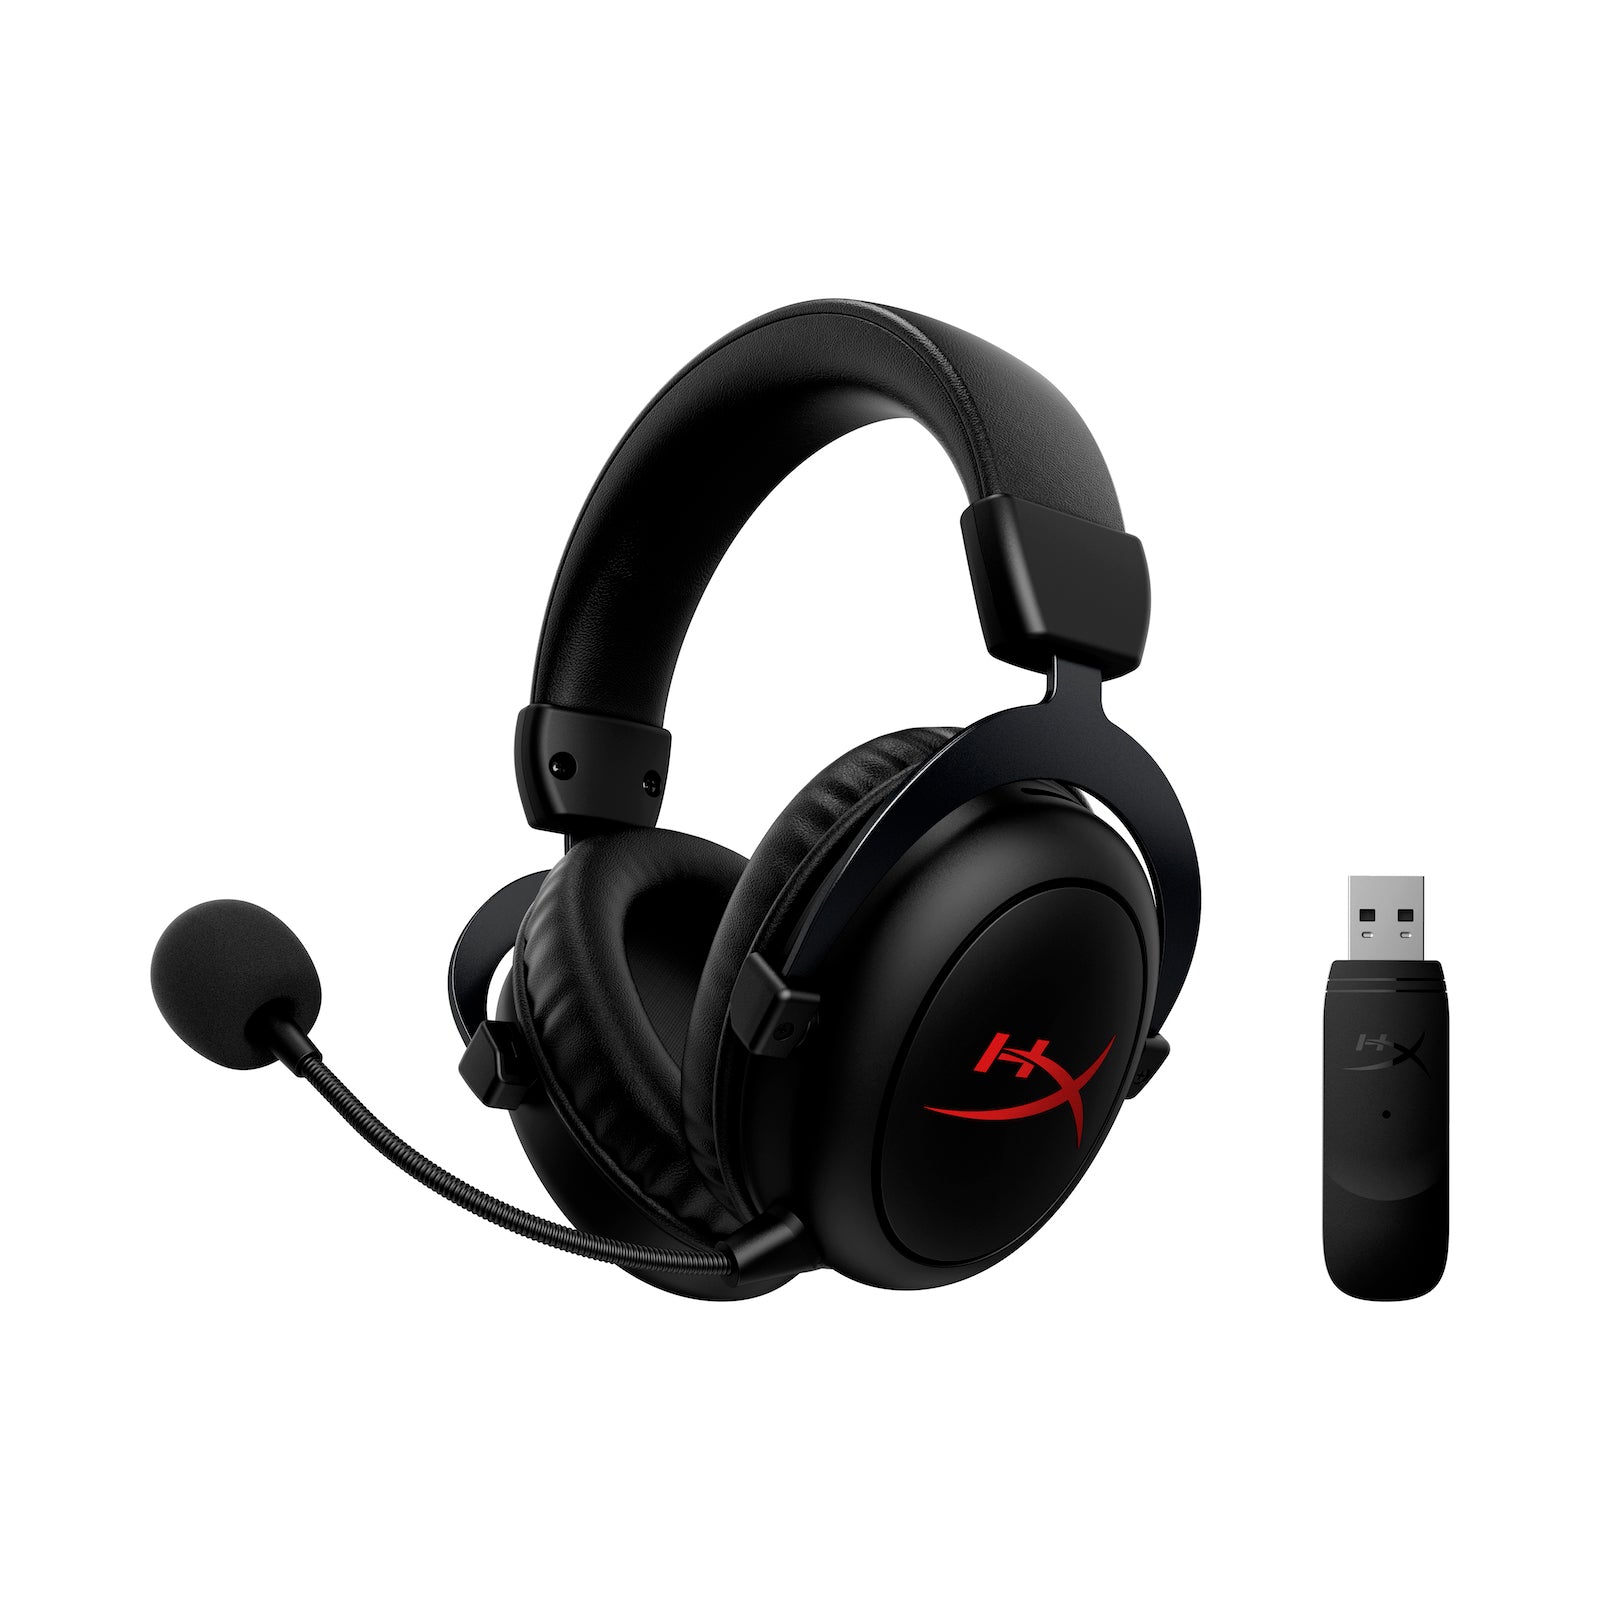 HyperX Cloud II Core Wireless Black Gaming Headset - main view pointing to the left side including usb dongle